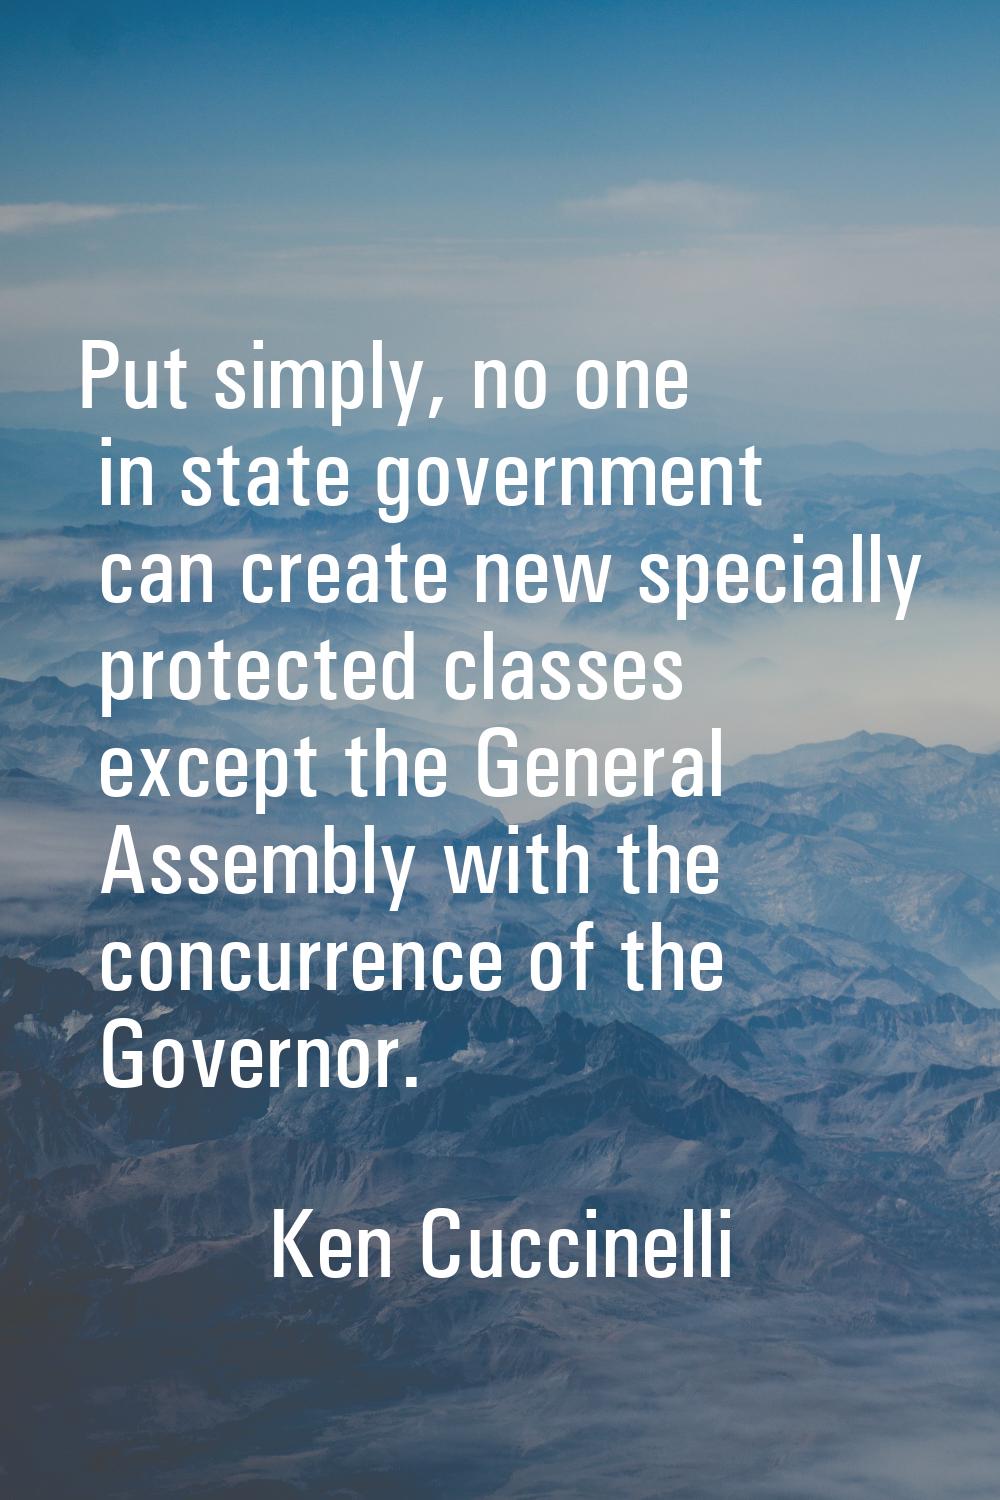 Put simply, no one in state government can create new specially protected classes except the Genera